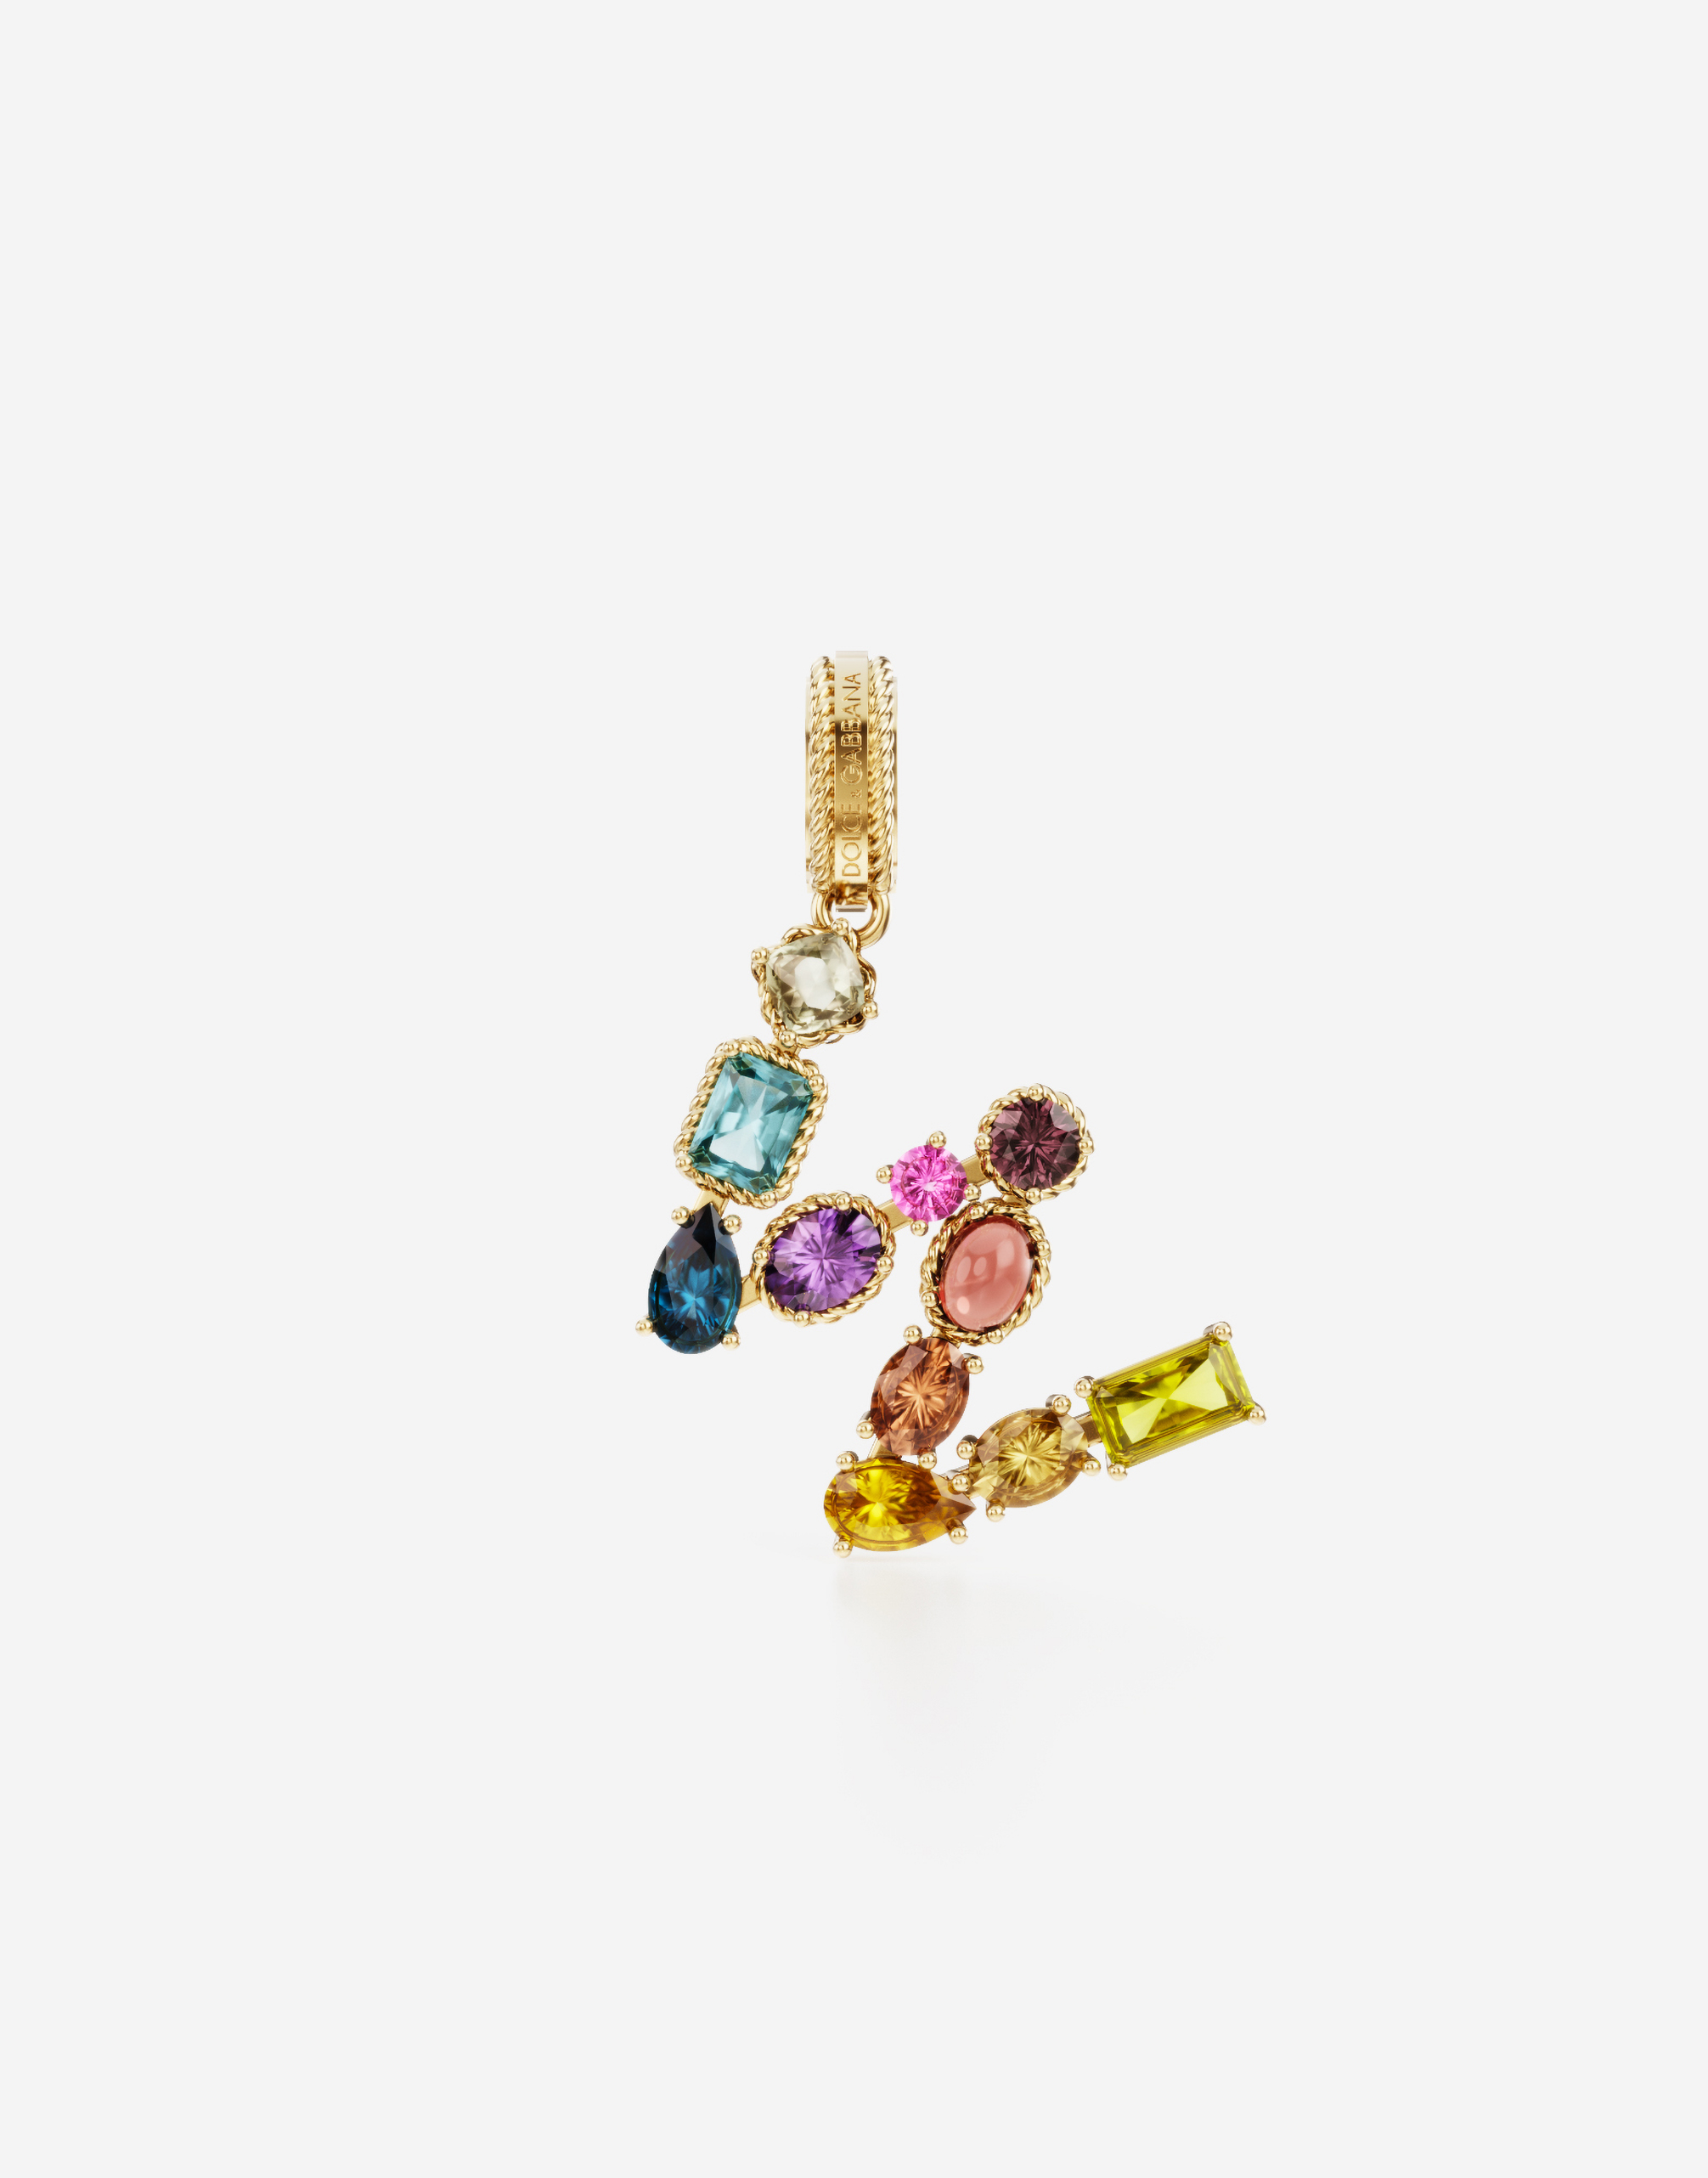 Rainbow alphabet W 18 kt yellow gold charm with multicolor fine gems in Gold